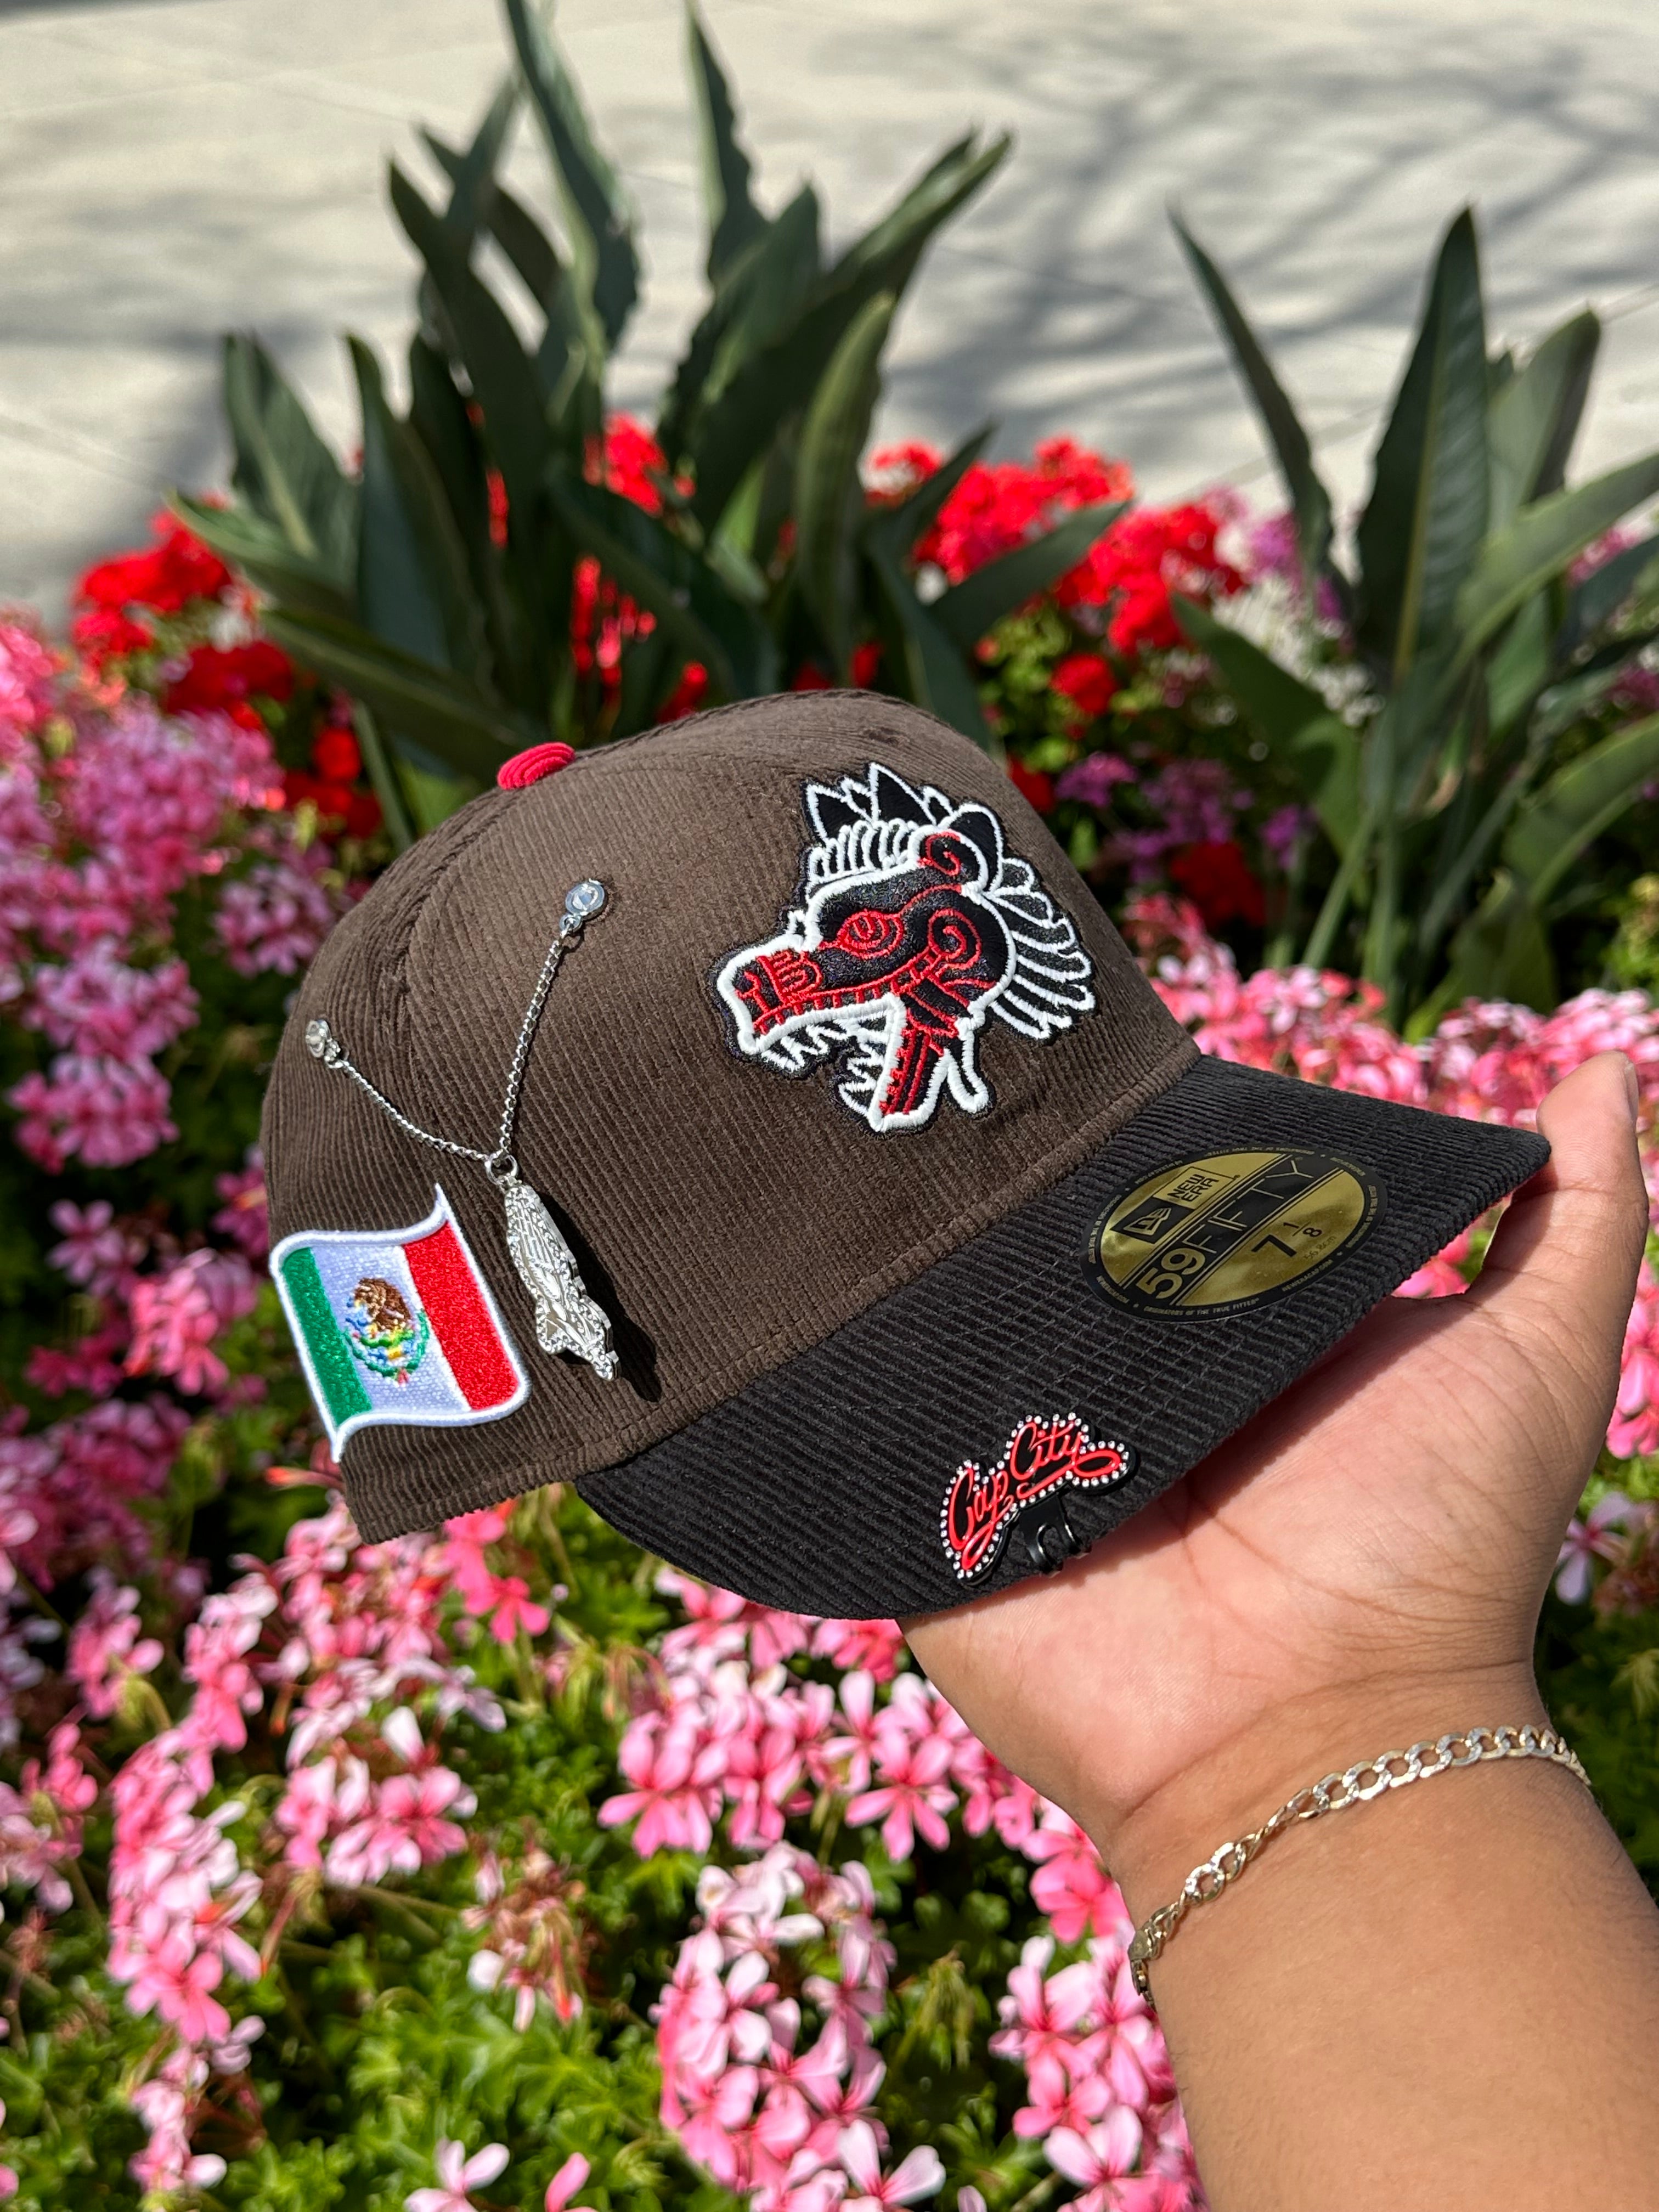 NEW ERA EXCLUSIVE 59FIFTY BROWN/BLACK CORDUROY MEXICO "QUETZALCOATL" W/ MEXICO FLAG SIDEPATCH